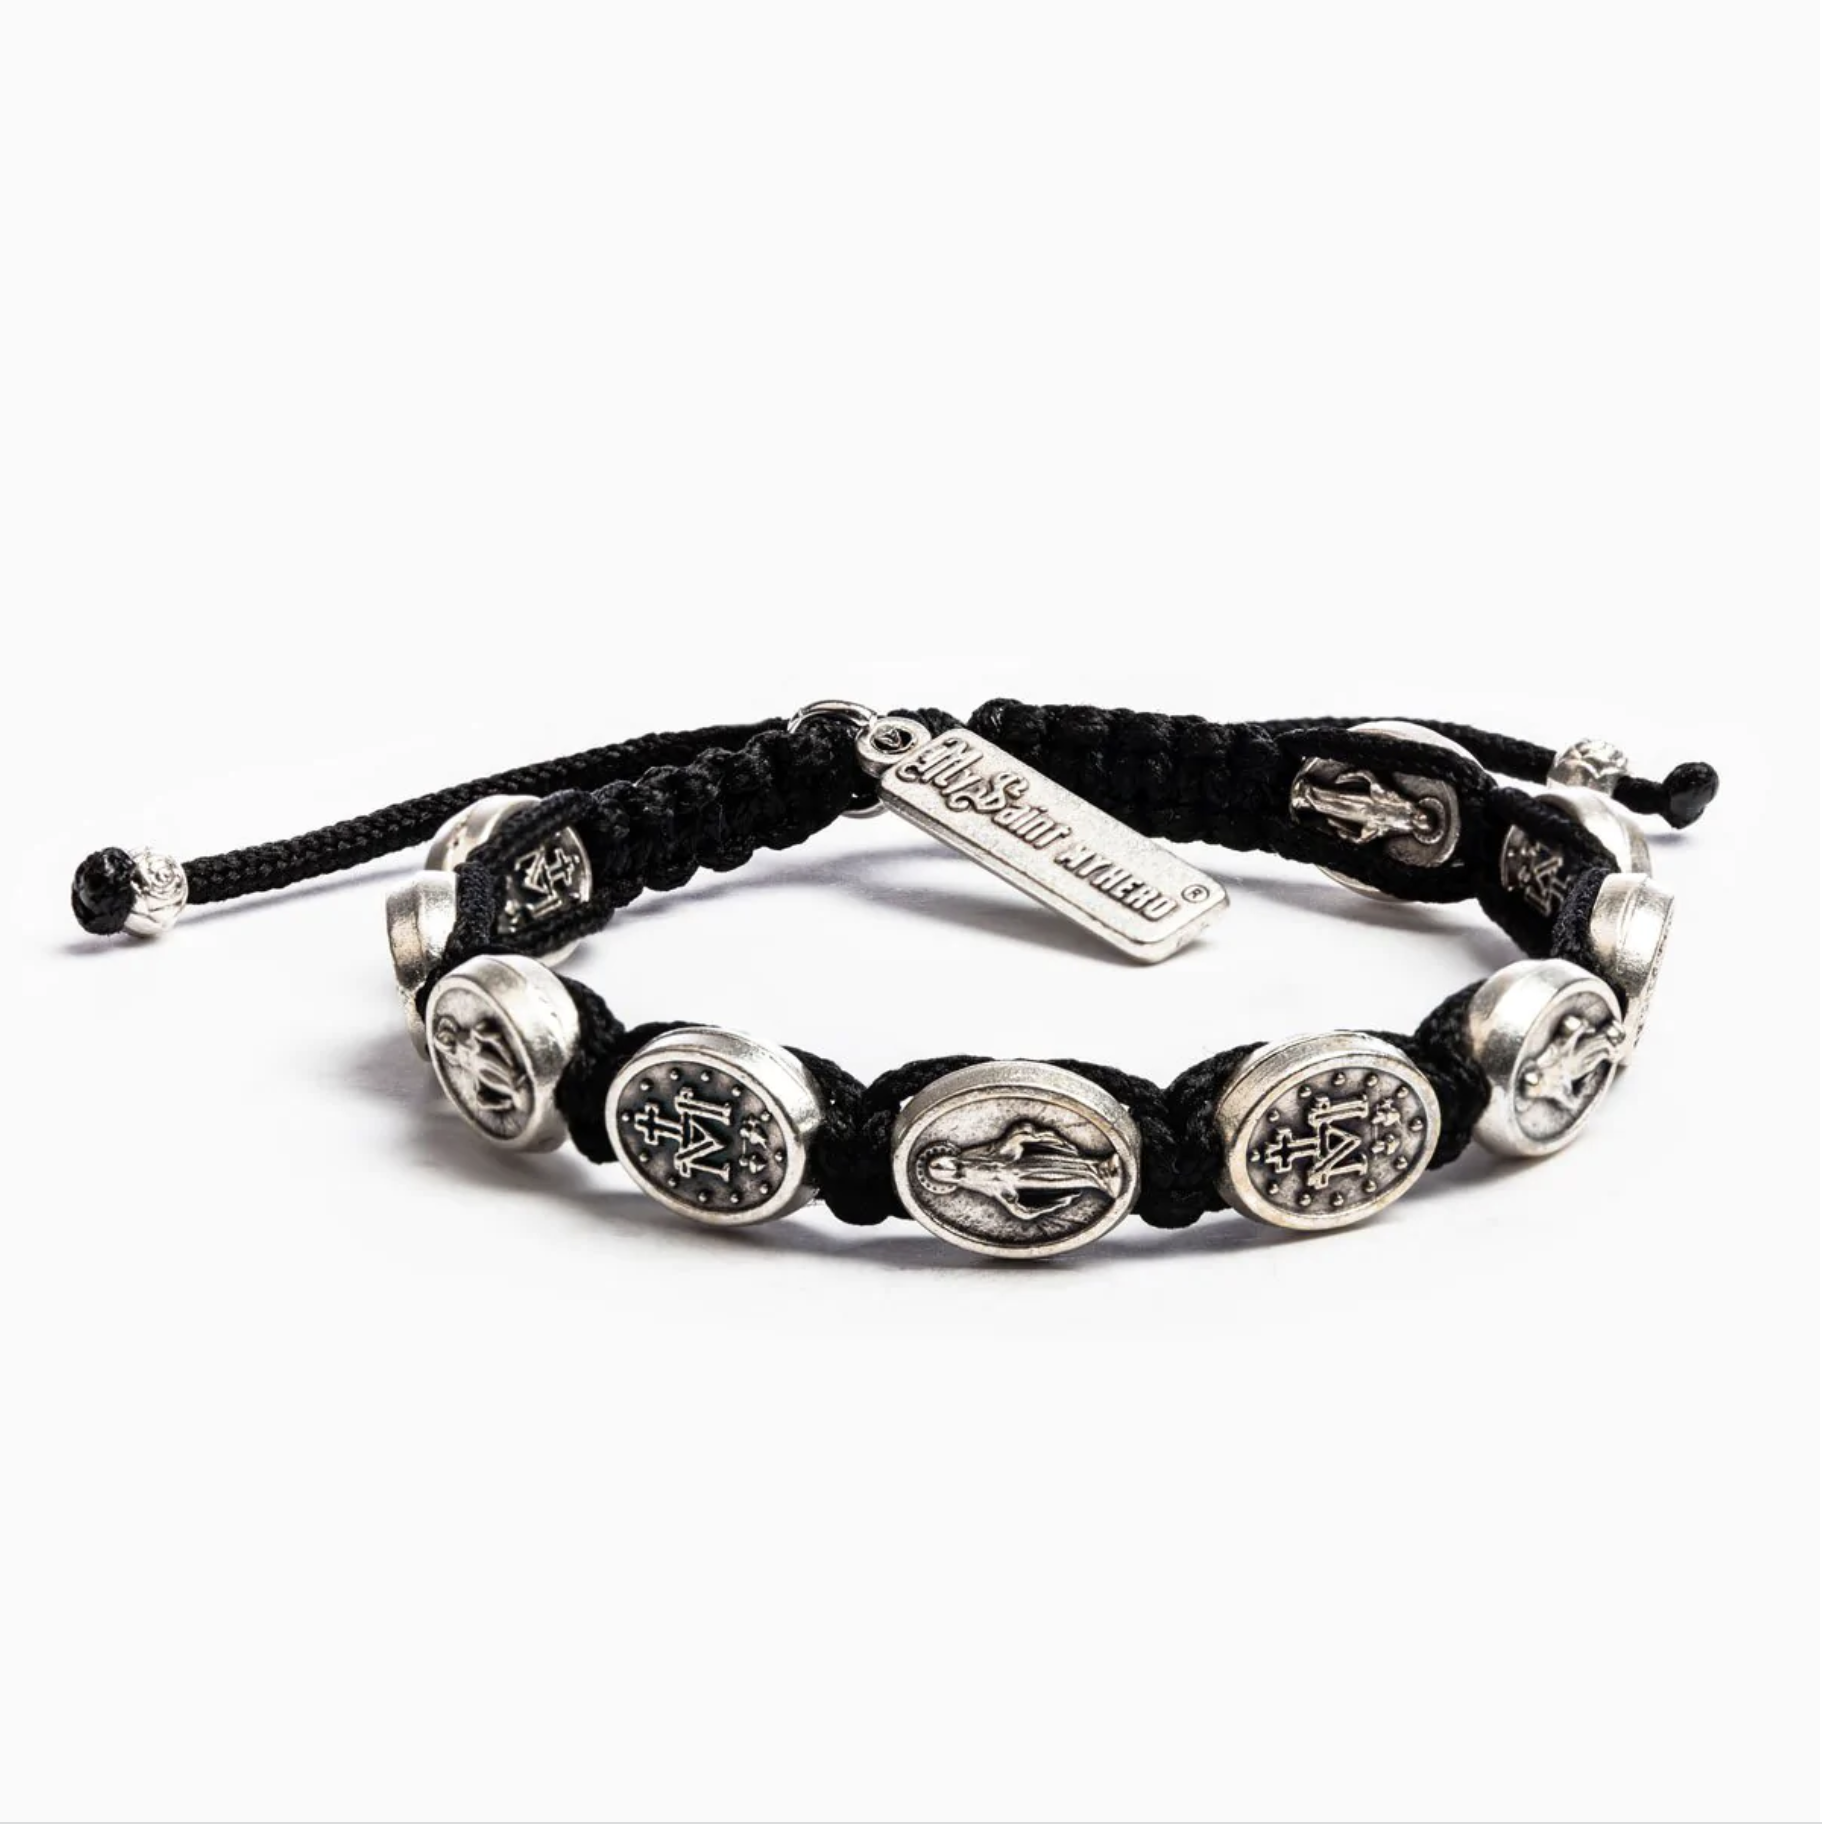 Say Yes Miraculous Mary Bracelet - Silver-Tone Medal on Black Cord